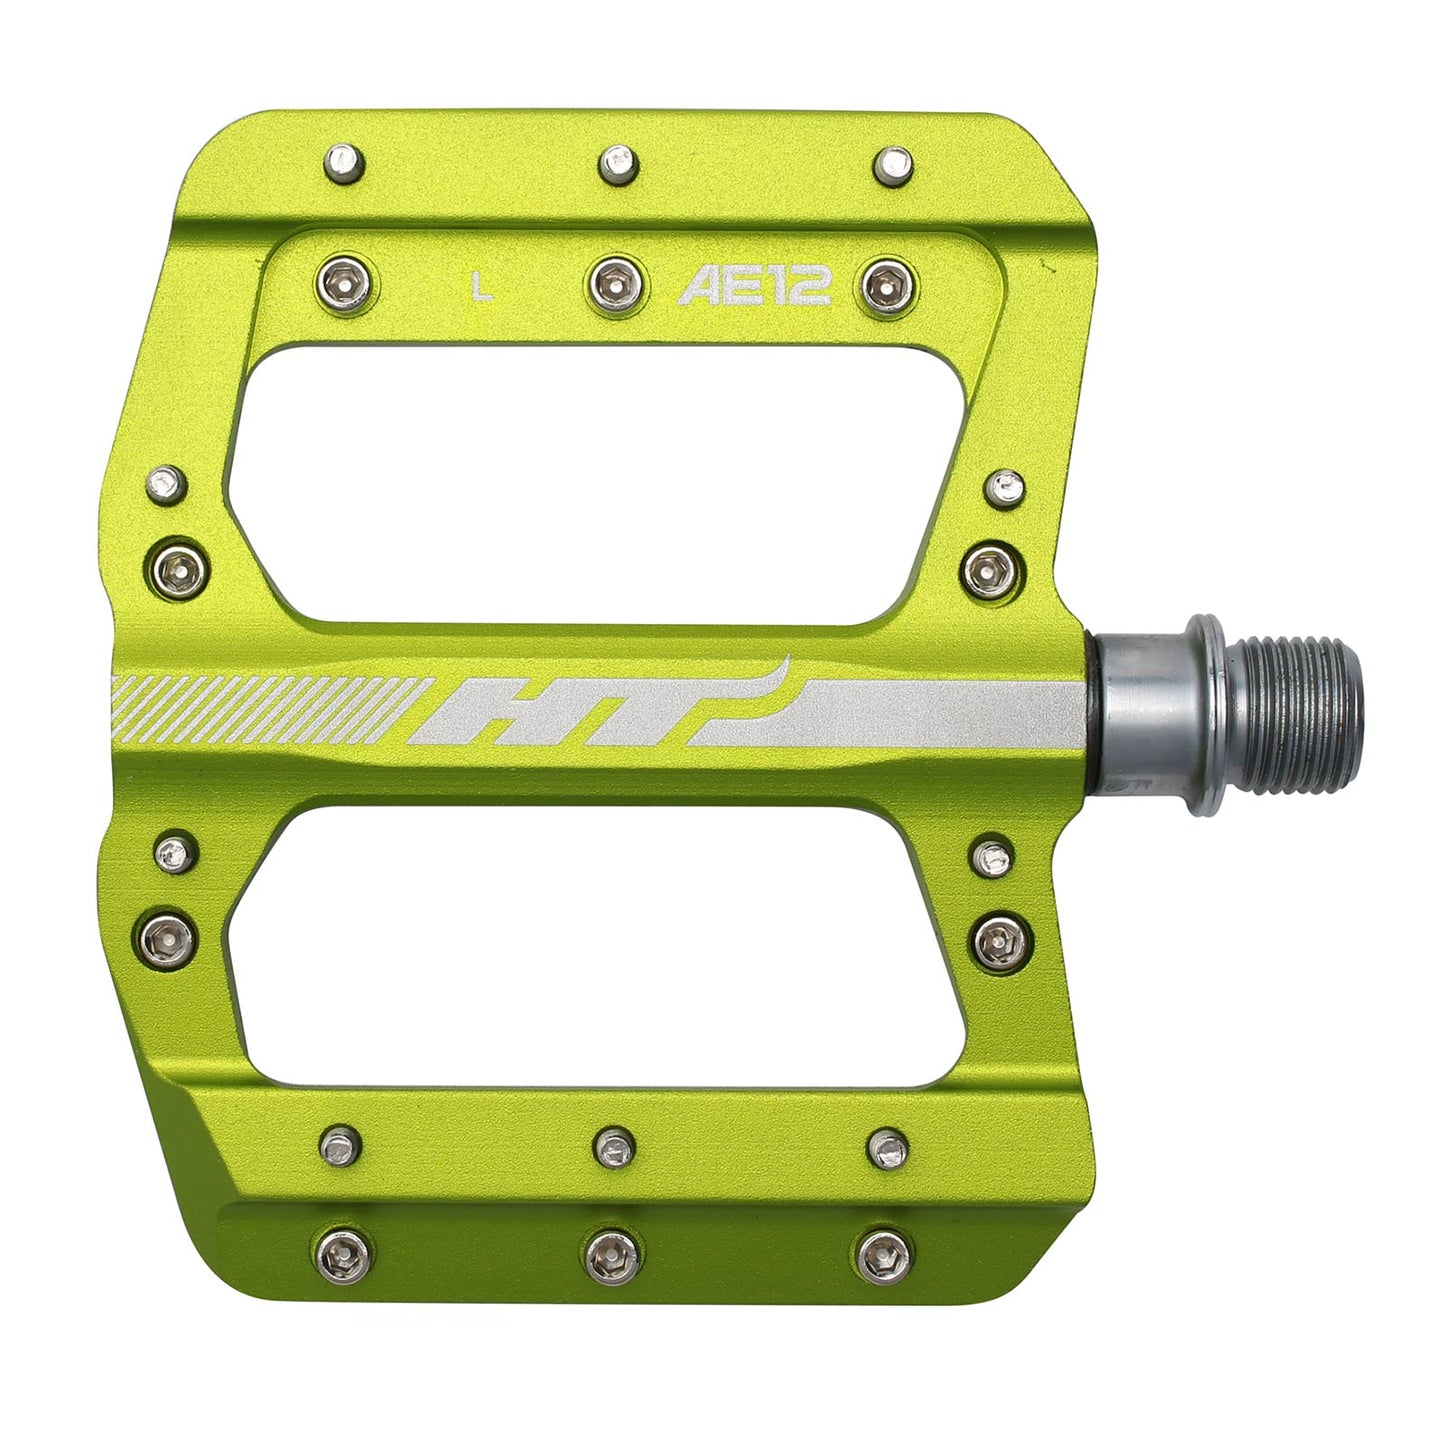 Ht AE12 Pedals Alloy / CNC CRMO - Apple Green